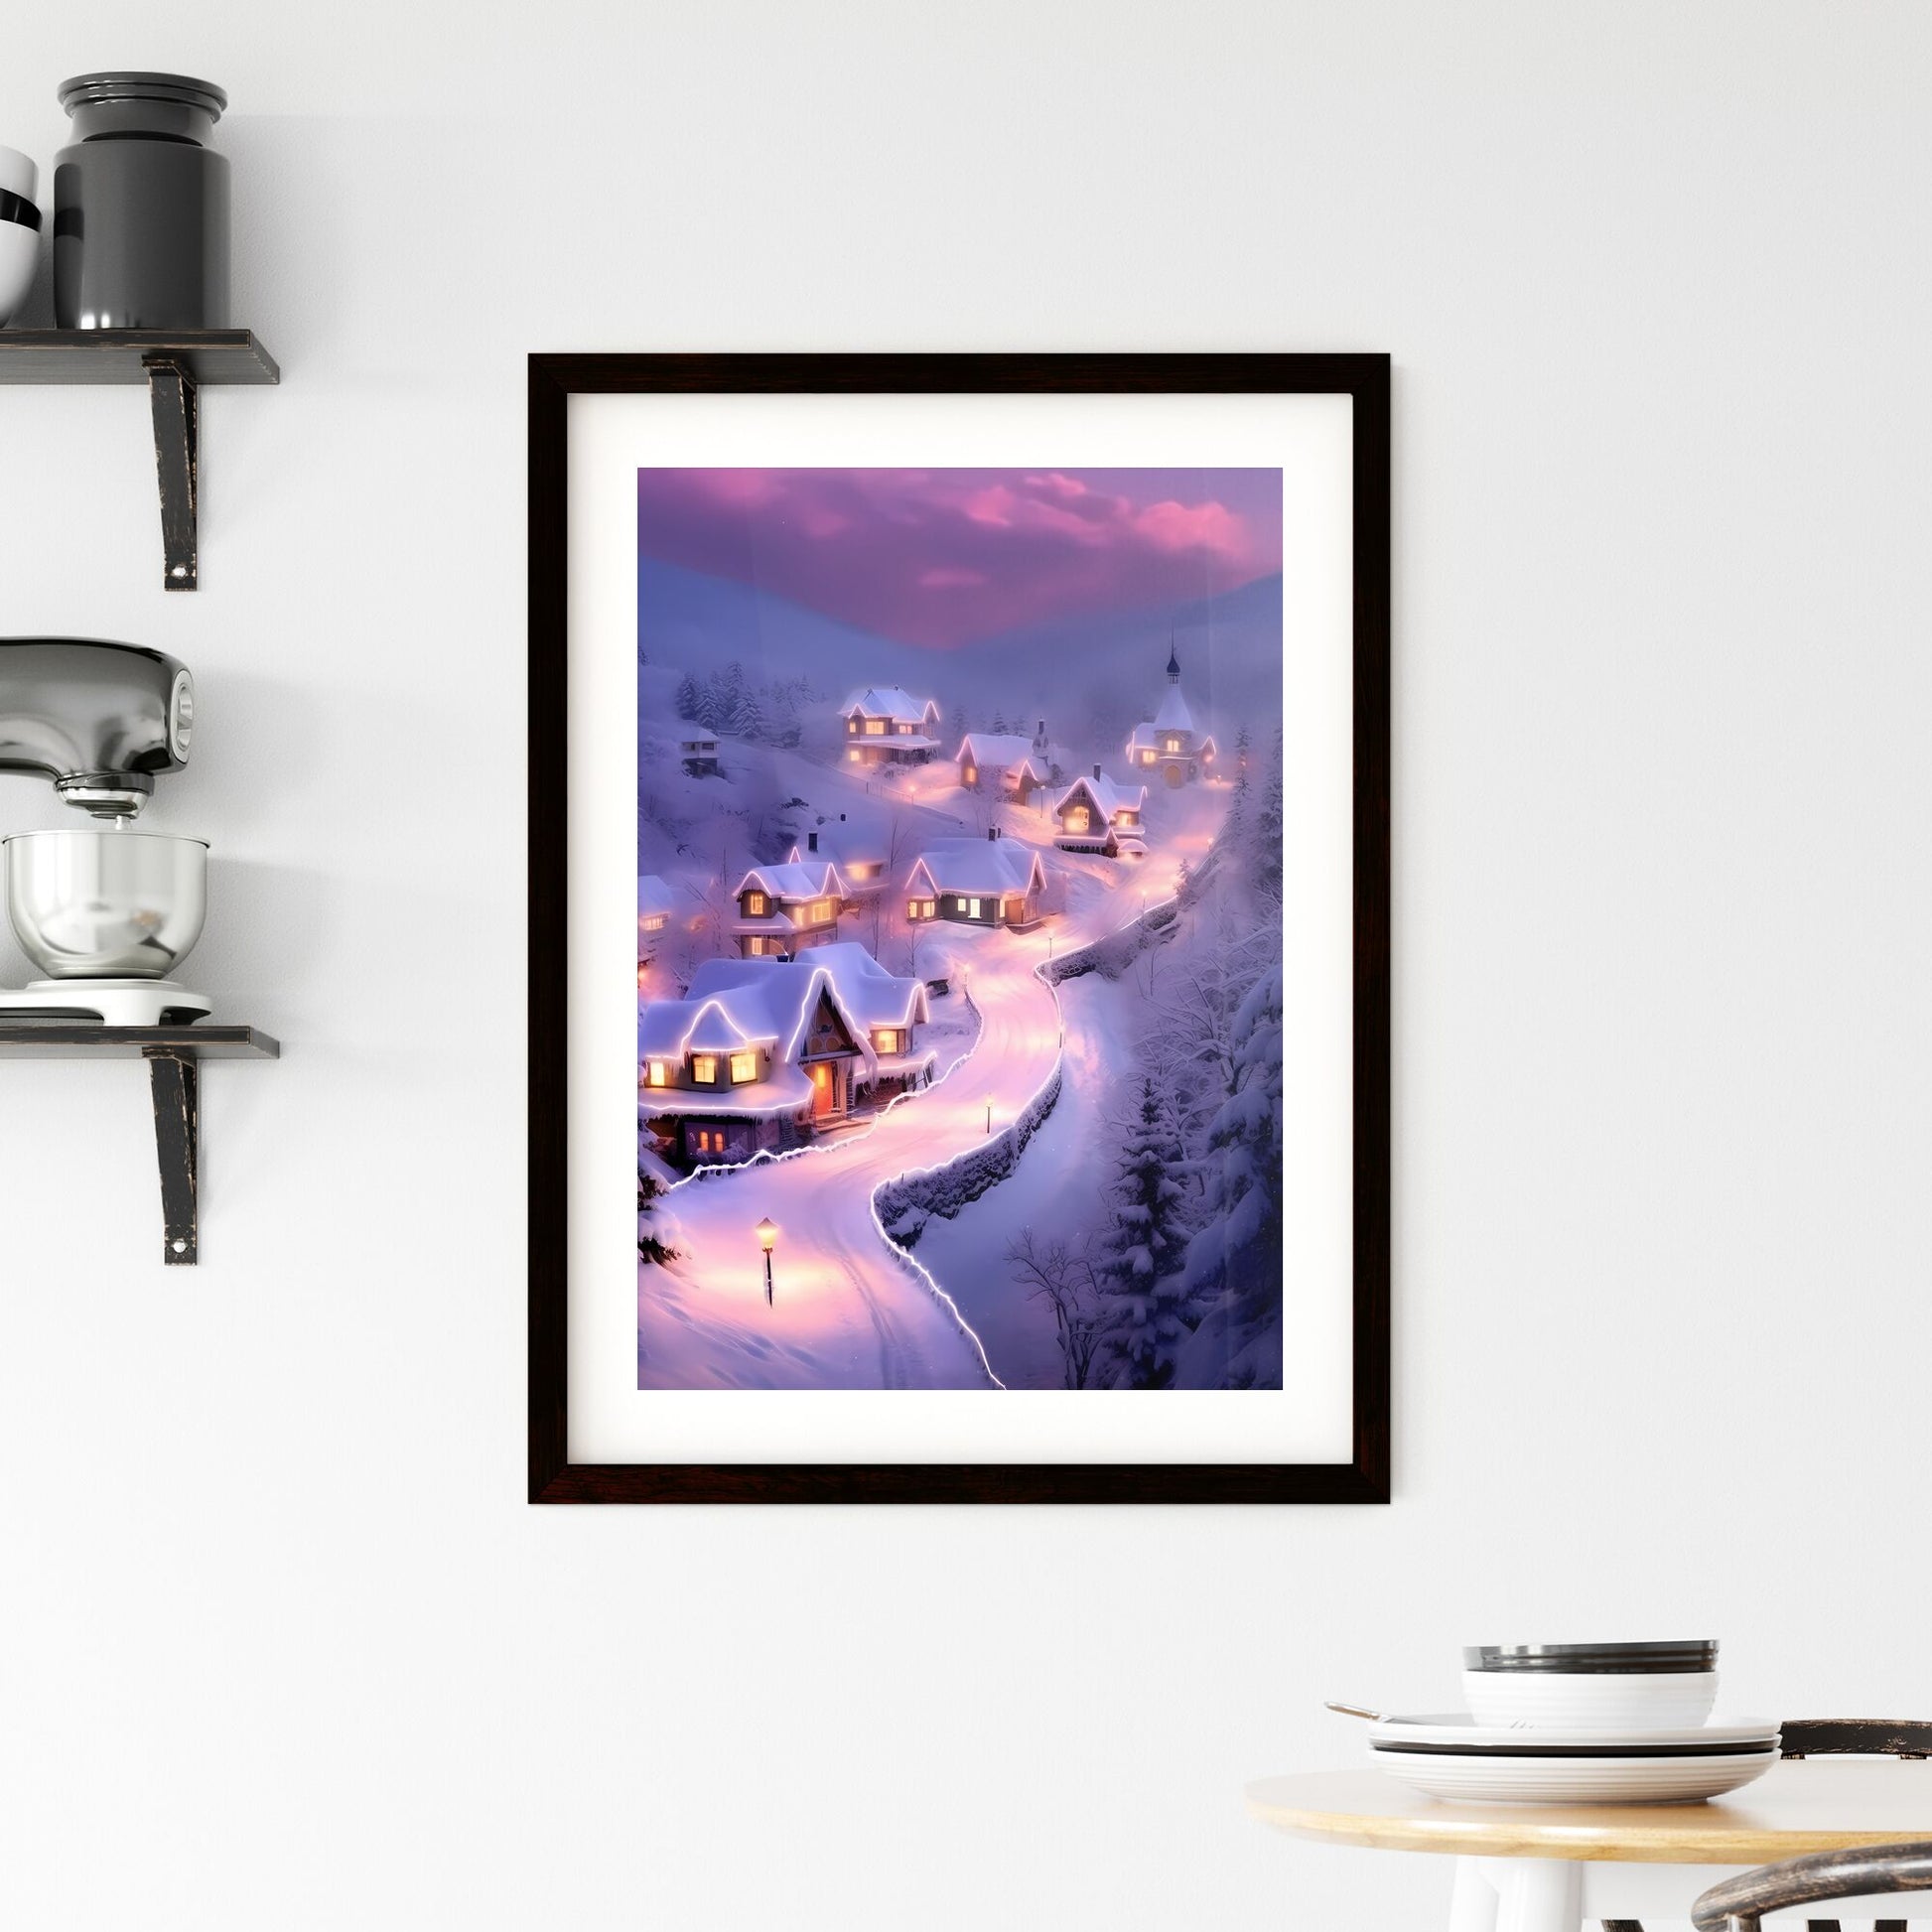 A Poster of beautiful snow scene, pink snow - A Snowy Village With Lights On The Roof Default Title